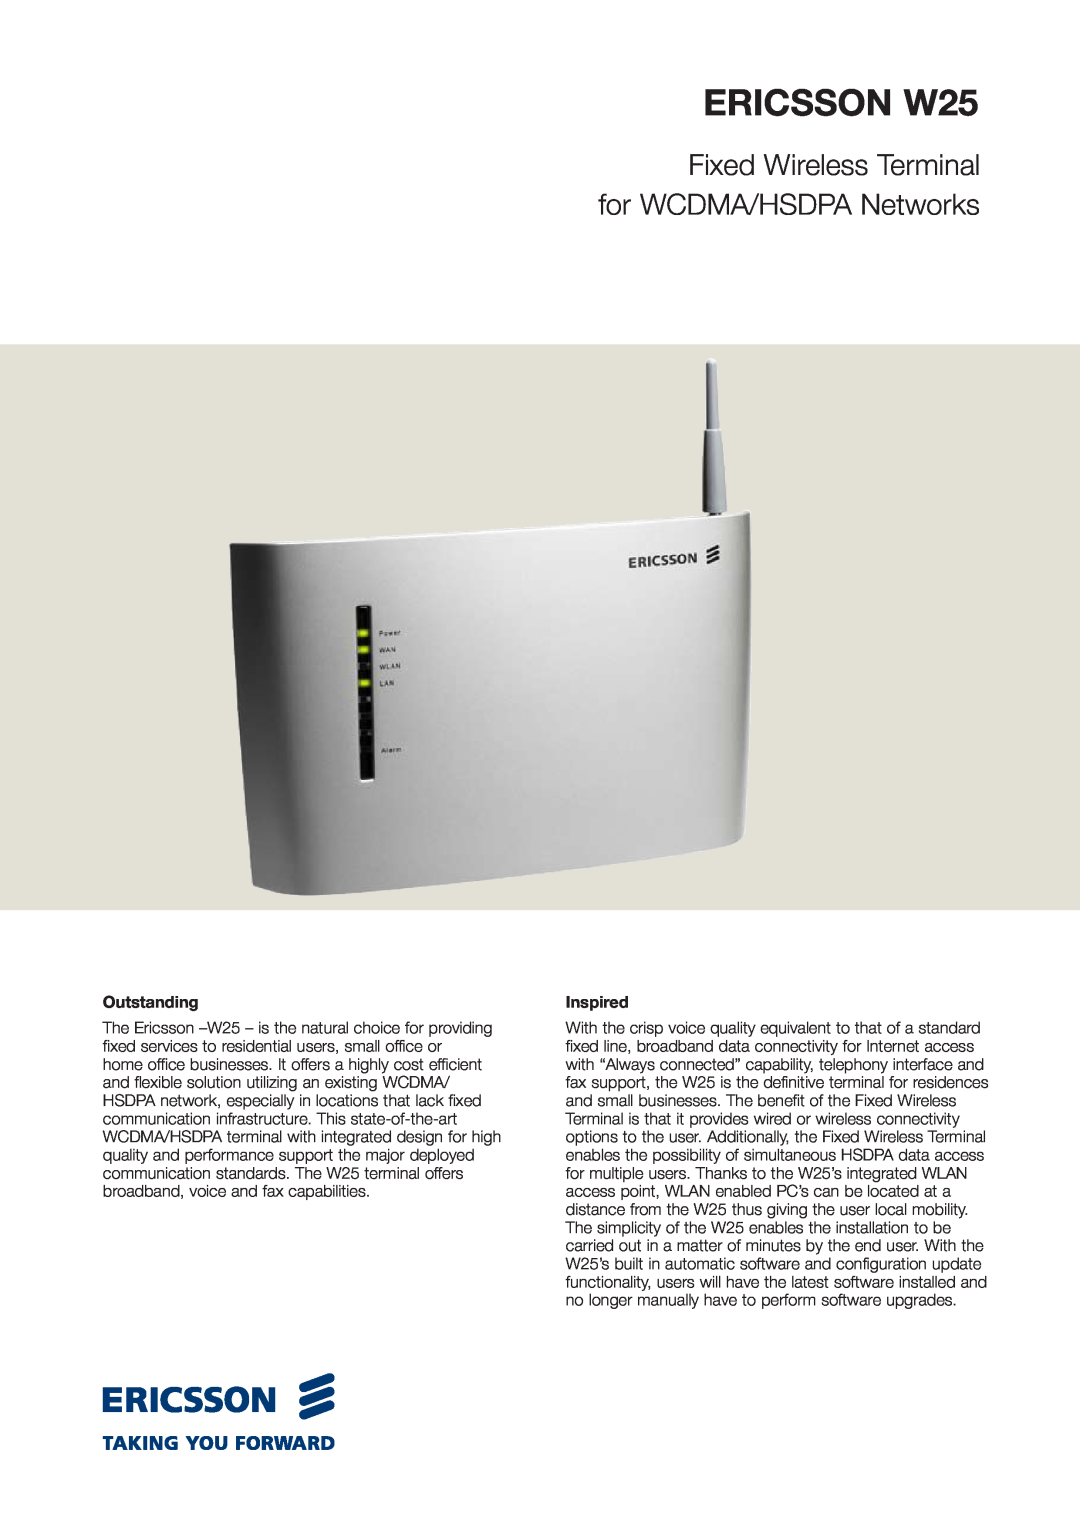 Ericsson manual Outstanding, Inspired, Ericsson W25, Fixed Wireless Terminal for WCDMA/HSDPA Networks 